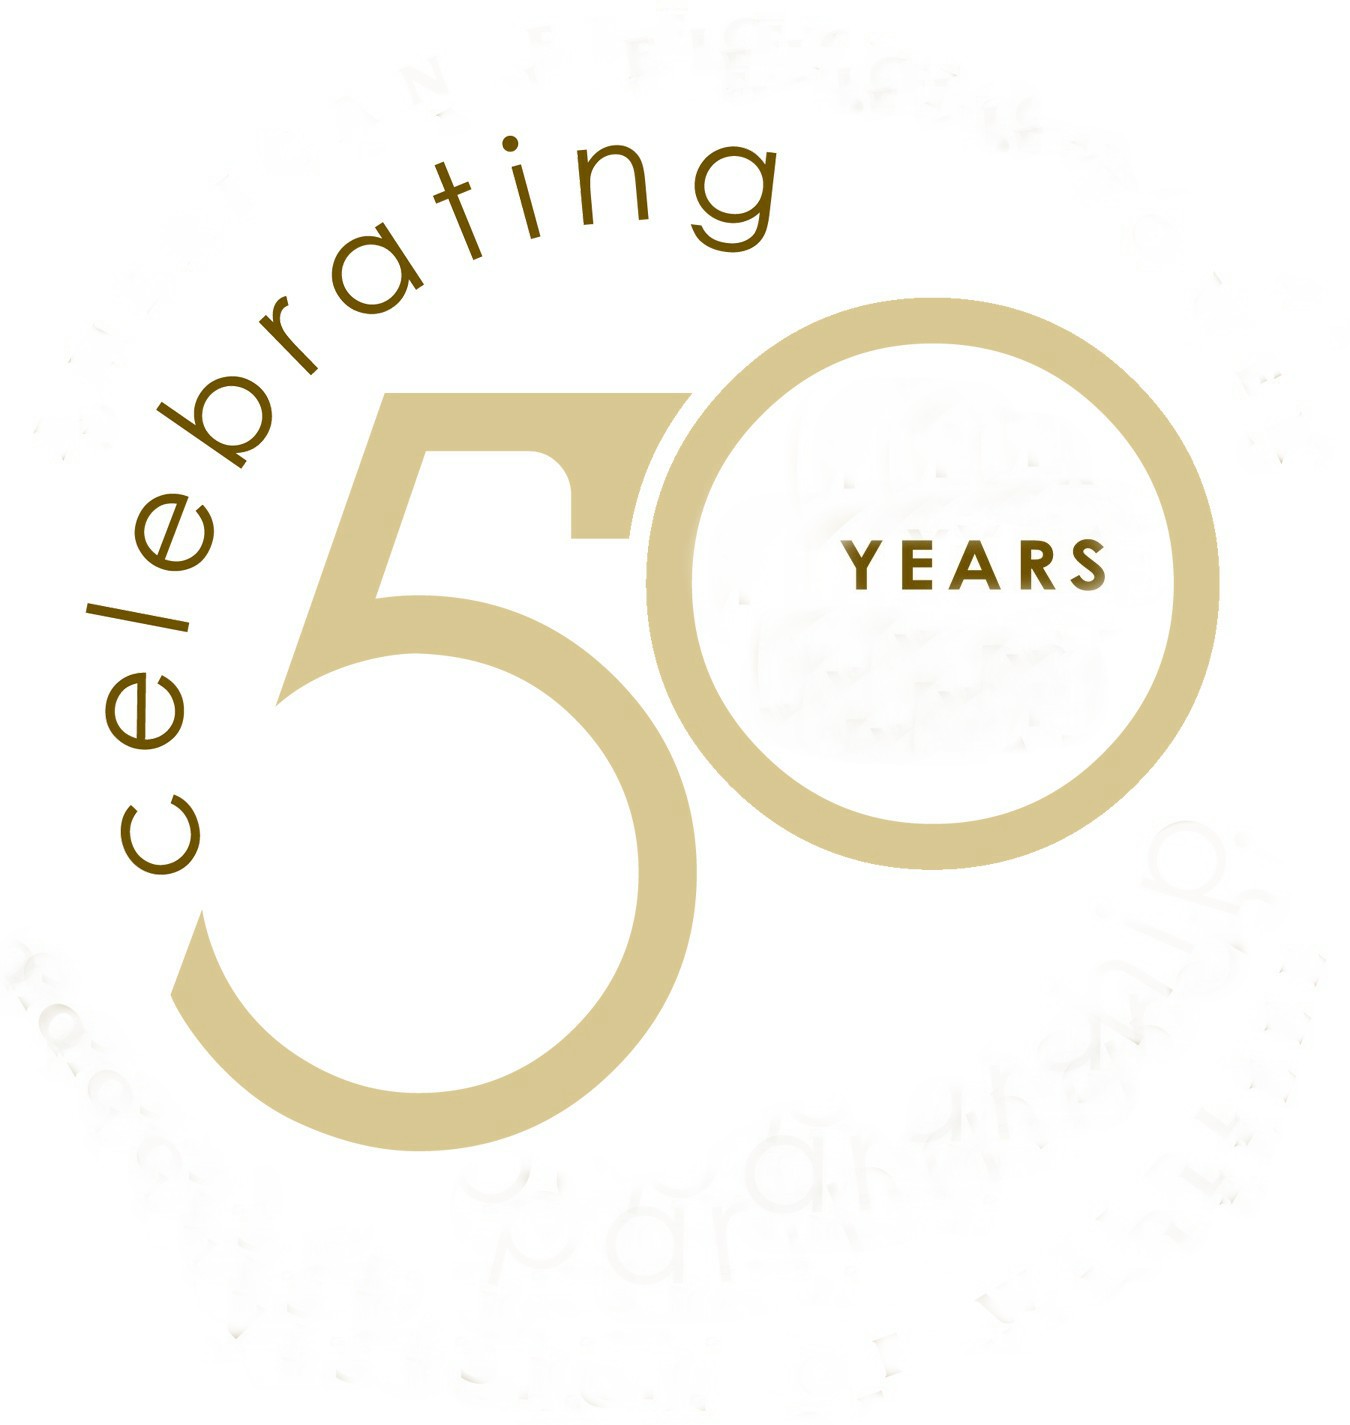 This Year Lanera Decorating Celebrates It S 50th Year In Business